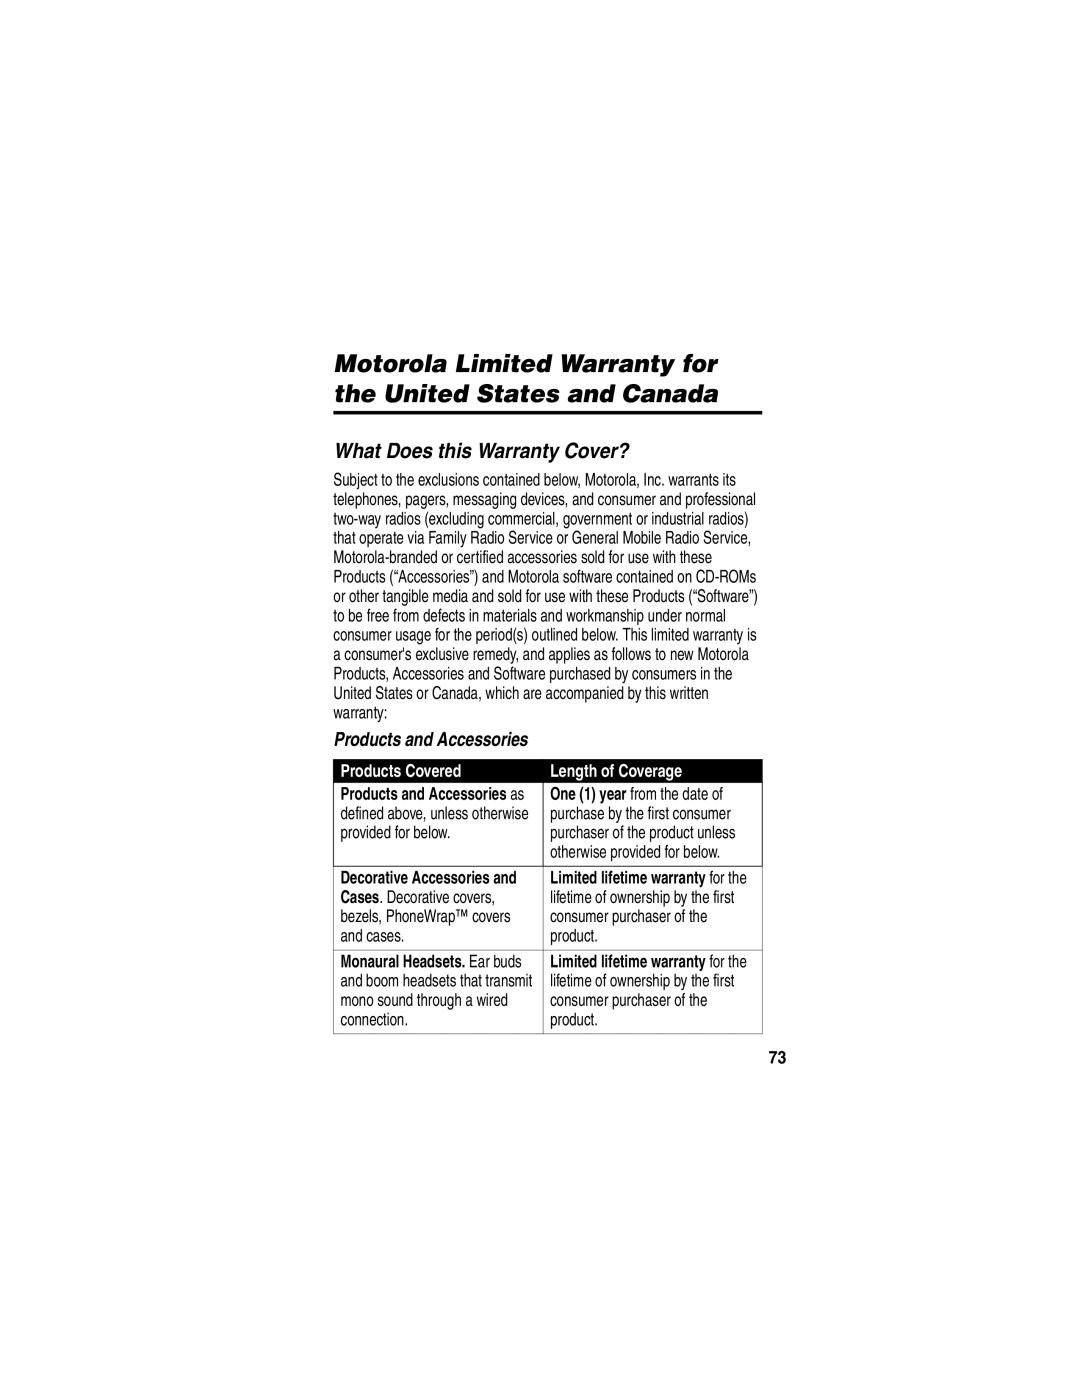 Motorola C353 manual What Does this Warranty Cover?, Products and Accessories, Products Covered Length of Coverage 